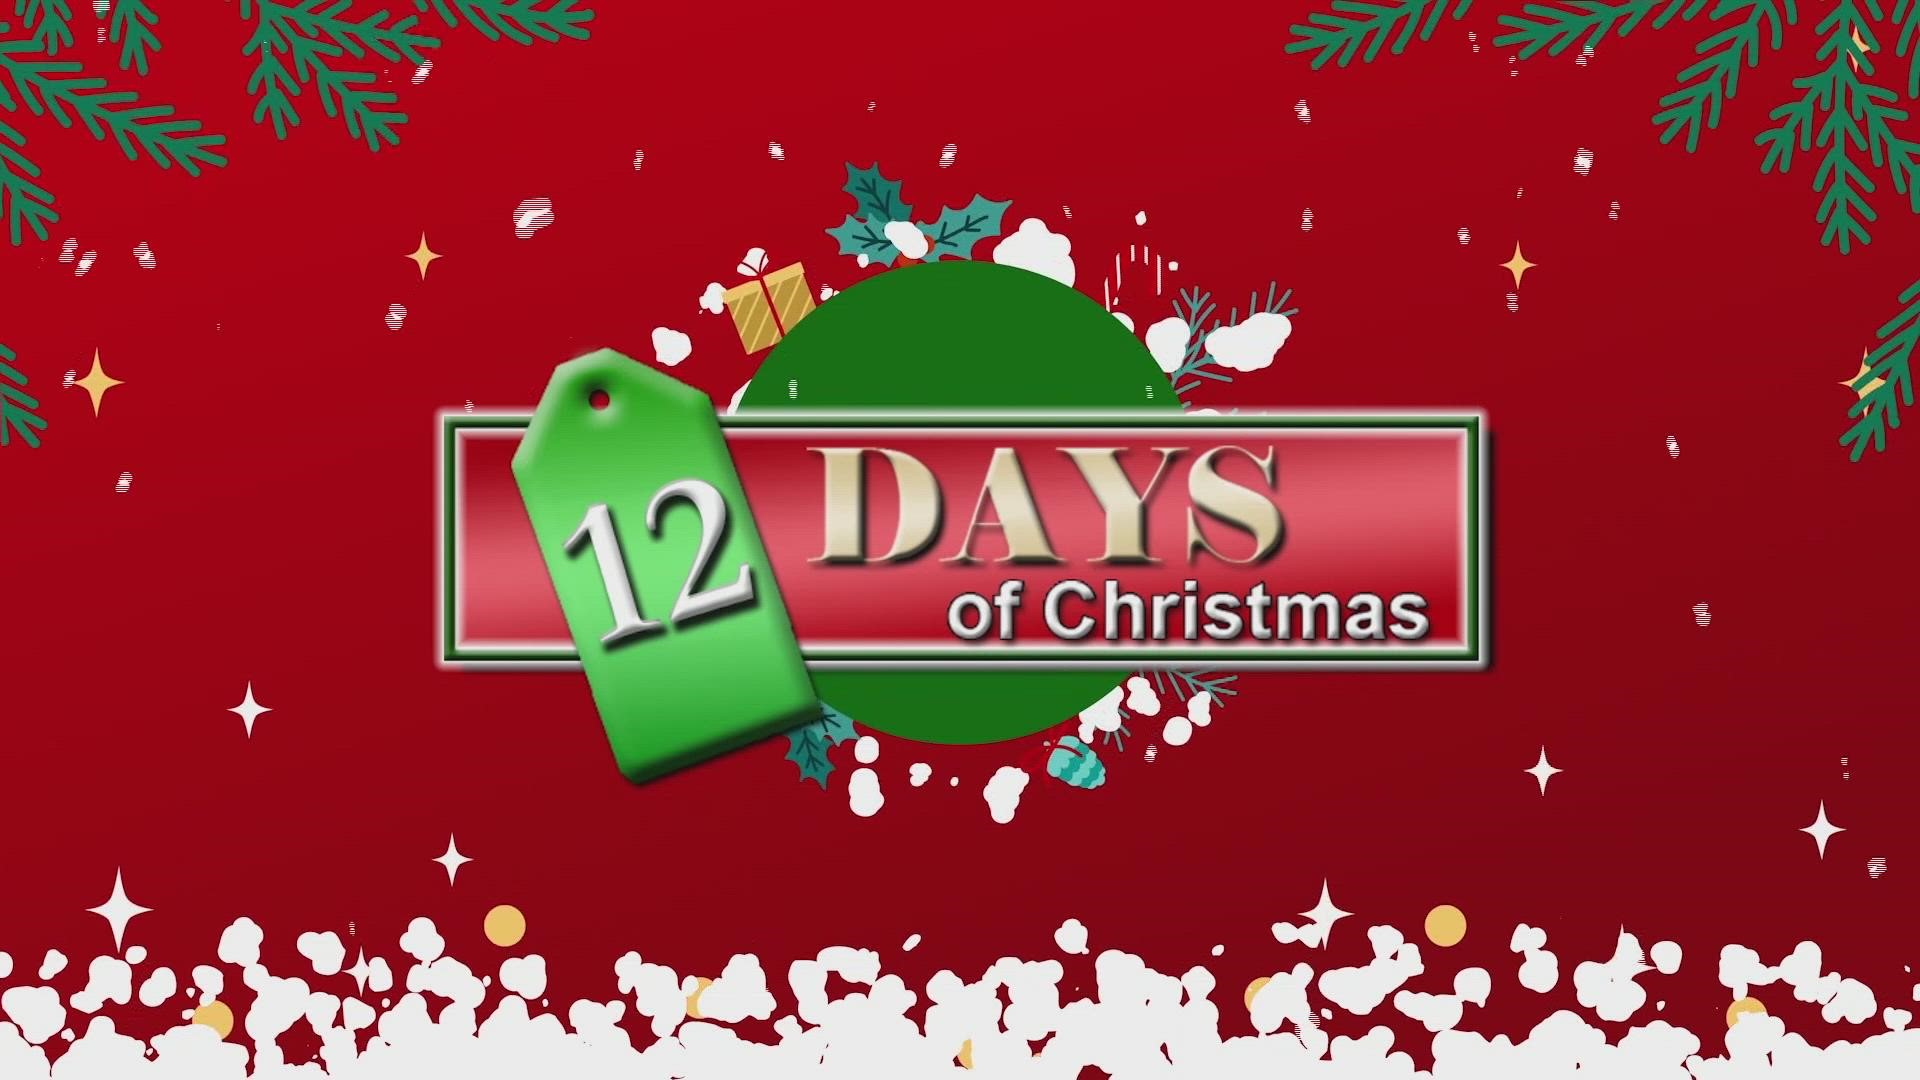 Enter to win six box seat tickets to "Christmas on the Air" from The Orpheum Theatre on wqad.com/contests by 11:59 a.m. Dec. 11.